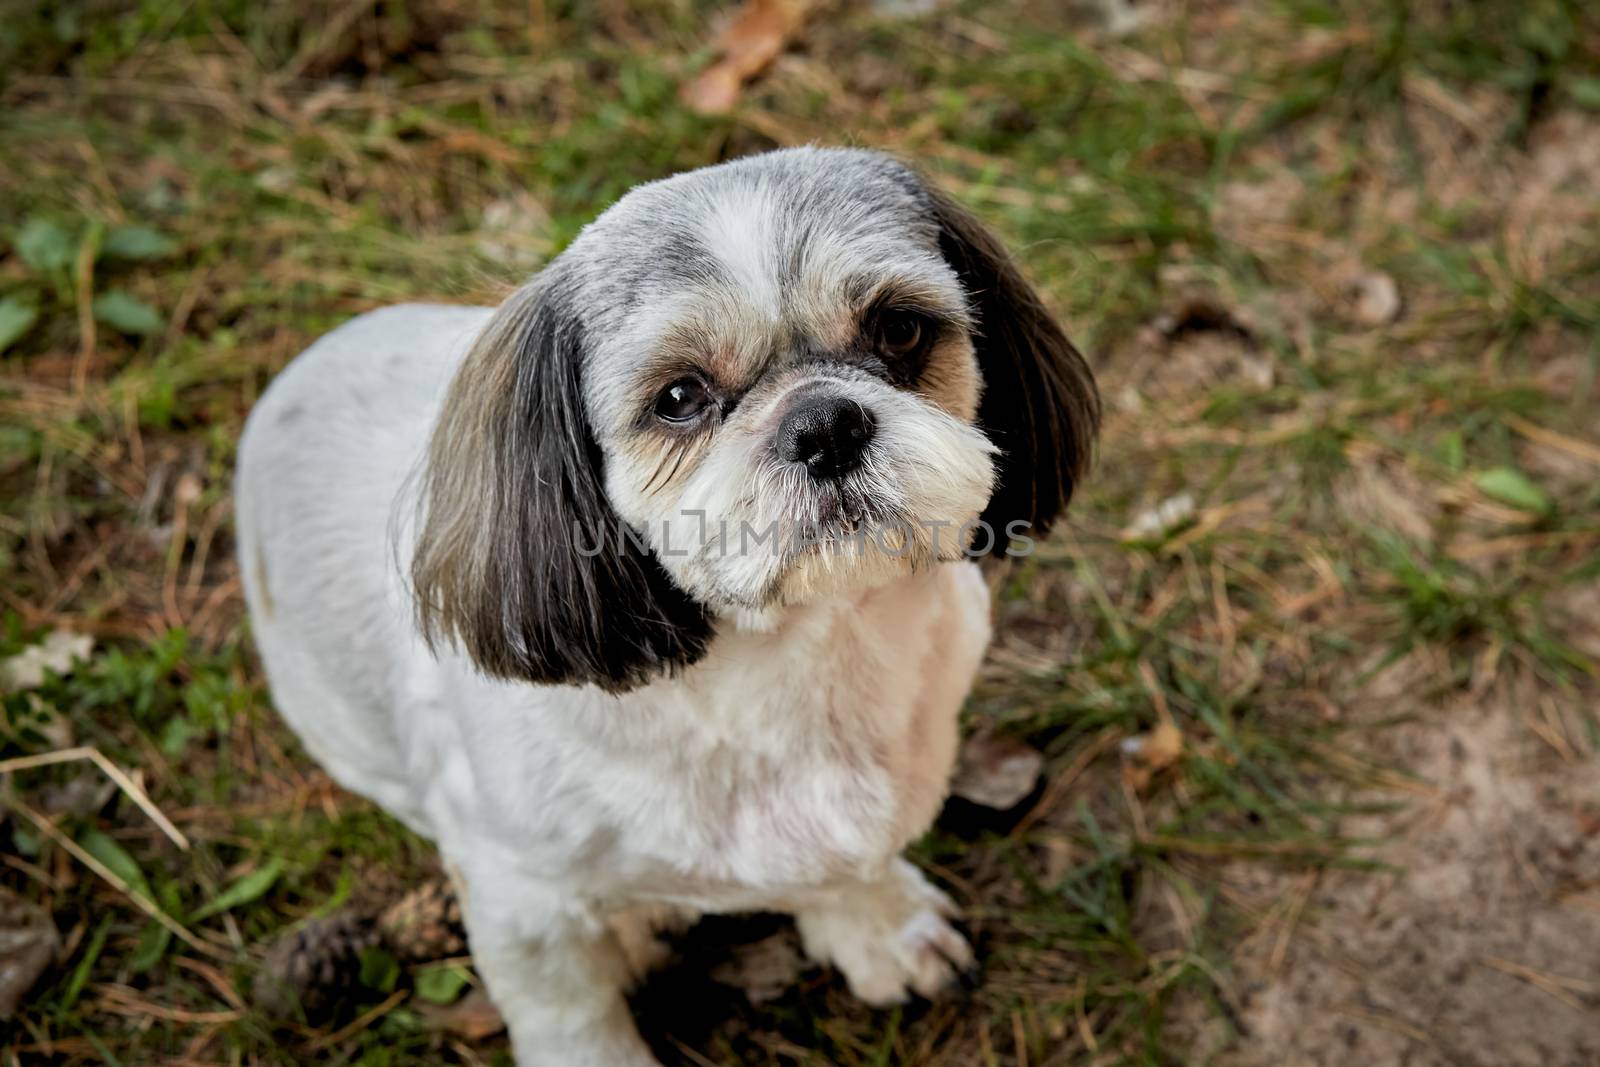 Shih Tzu dog sits on the grass in the forest